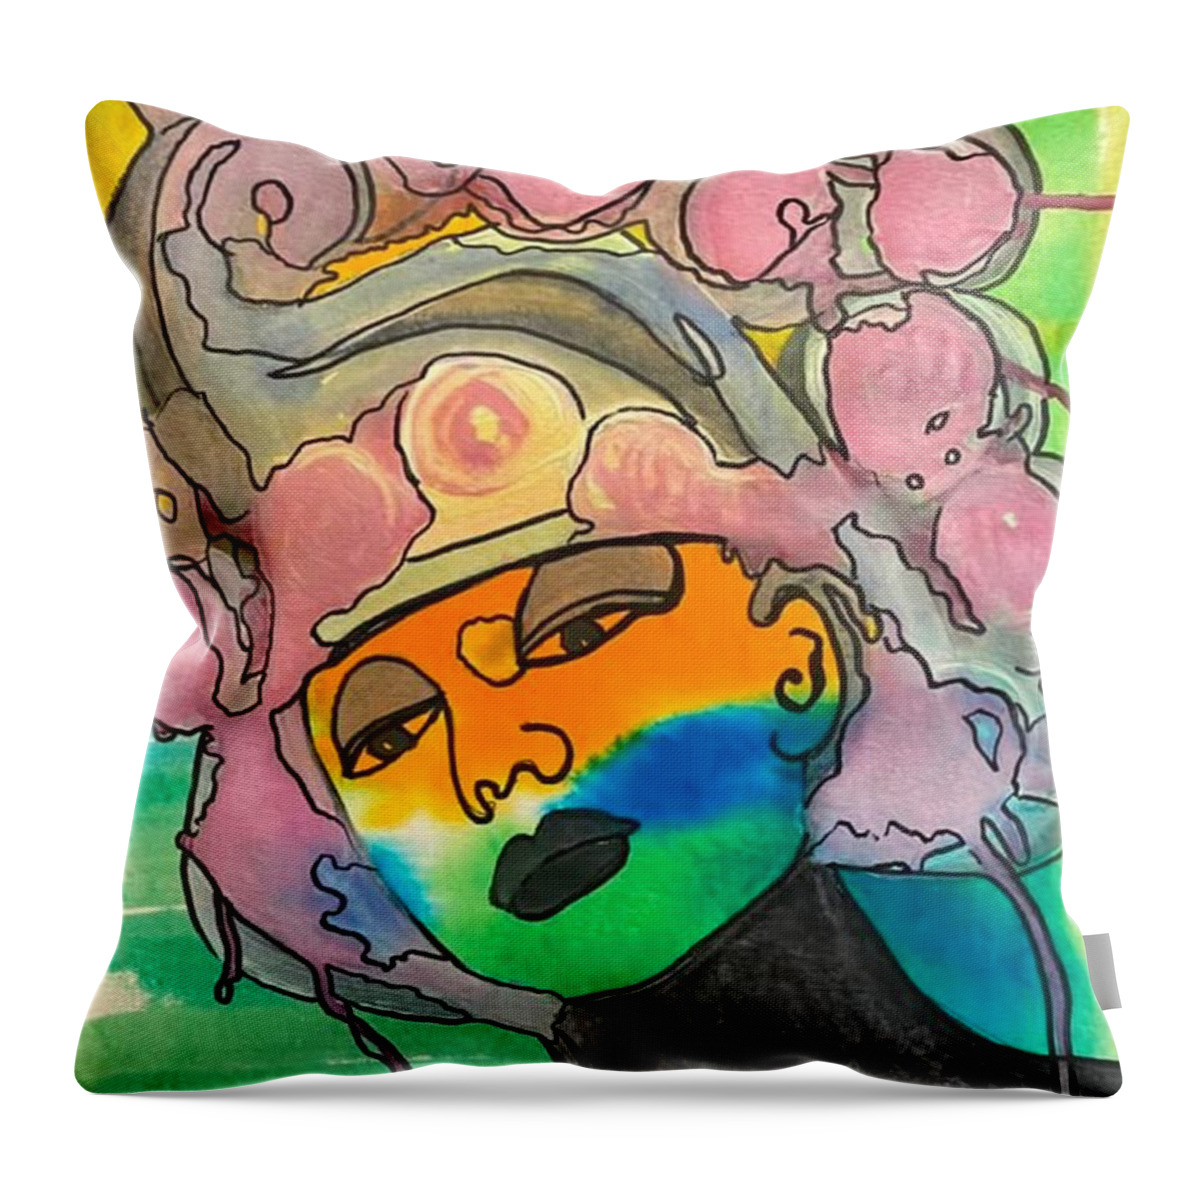  Throw Pillow featuring the painting Meeting Myself by Lorena Fernandez